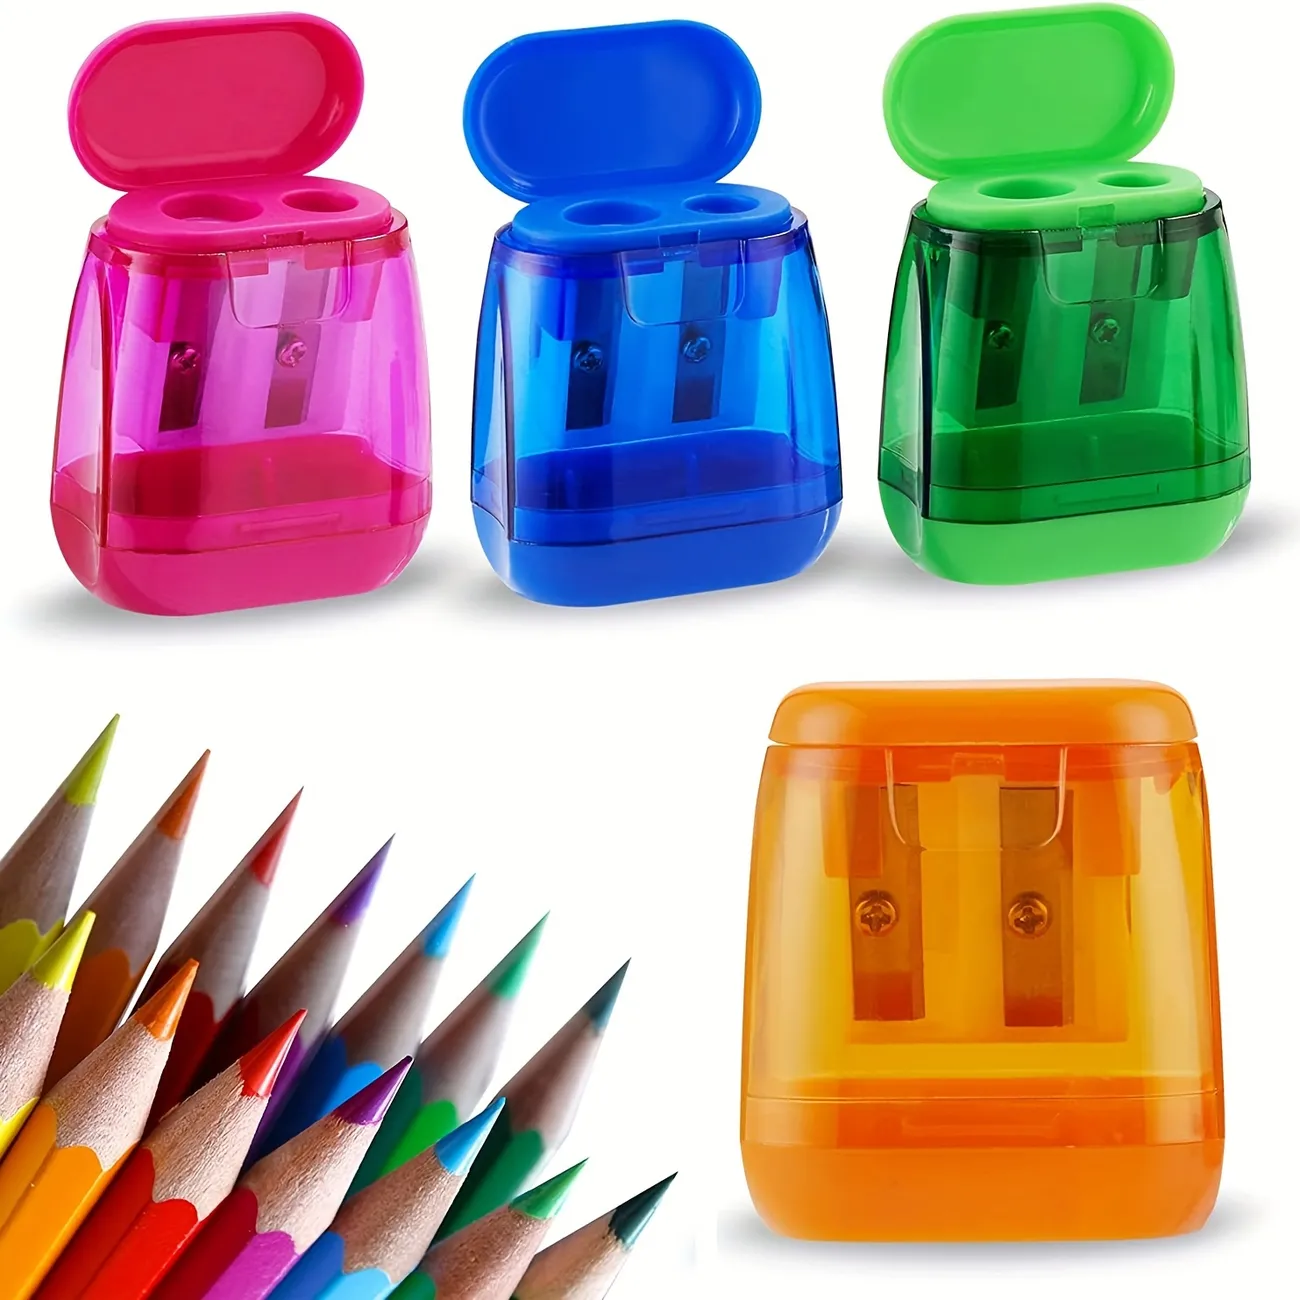 Sonuimy Pencil Sharpeners, 4 Pcs Pencil Sharpeners Manual,Dual Holes Compact Colored Handheld Pencil Sharpener for Kids with Lid Adults Students